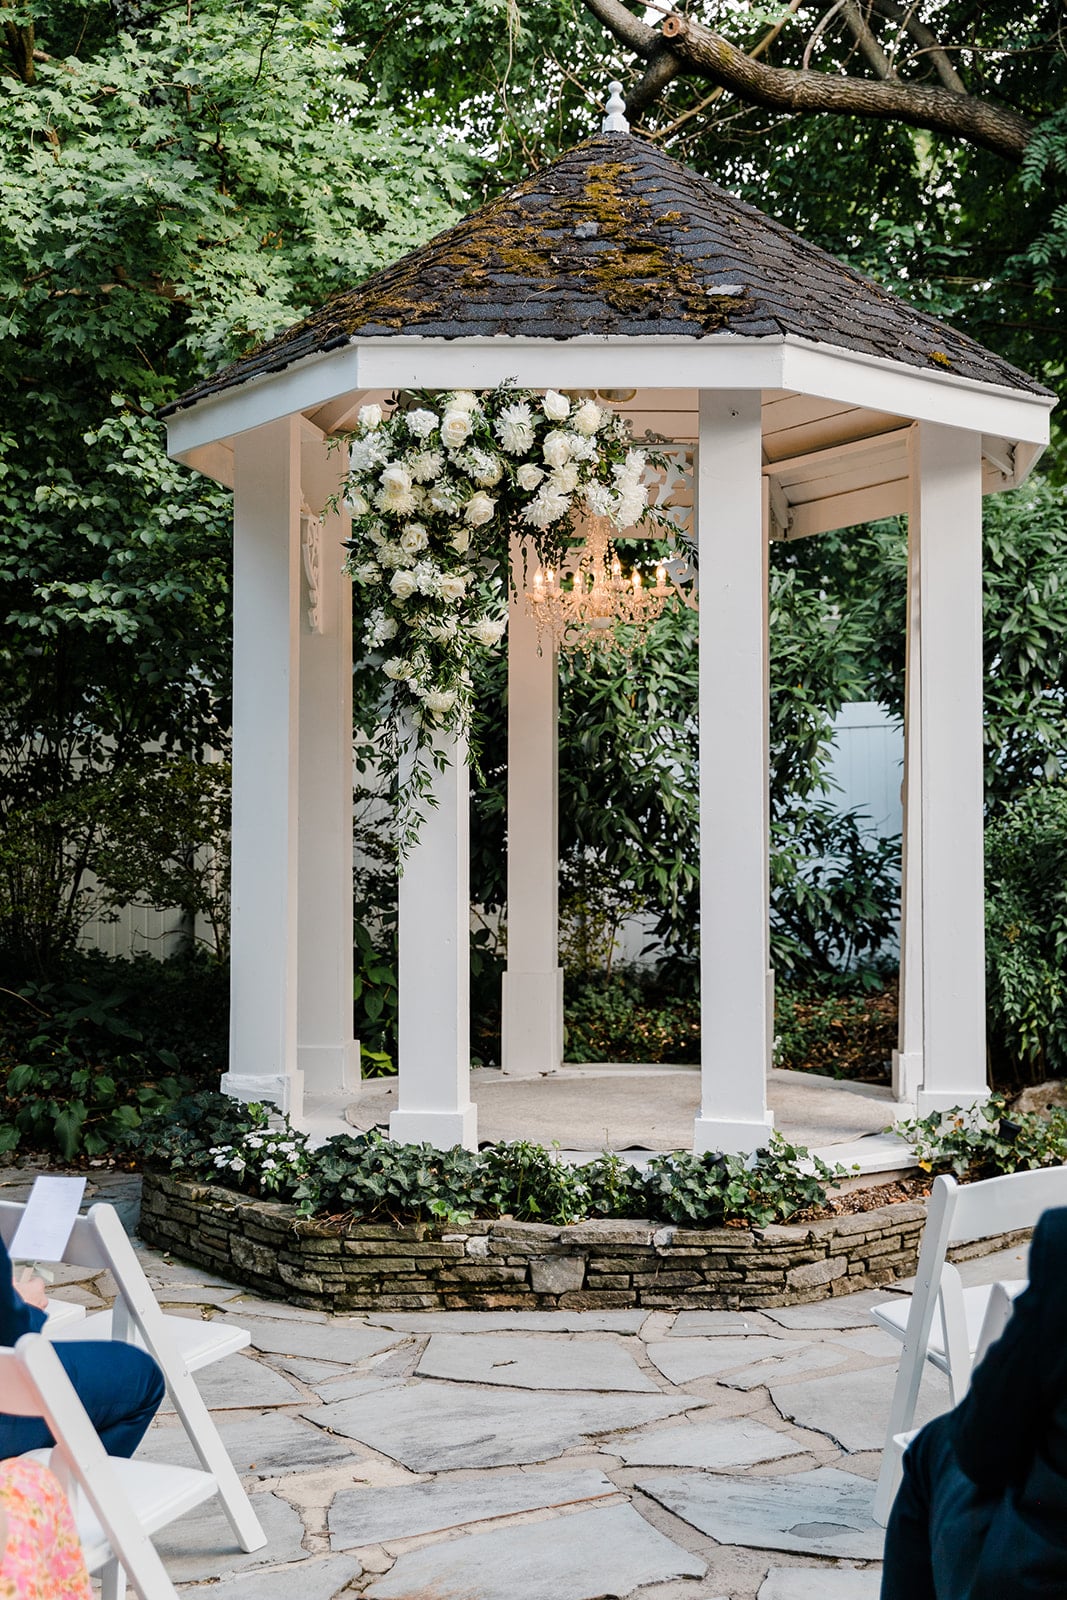 Outdoor Wedding Reception Near Nashville with Neutral Colors and Candles